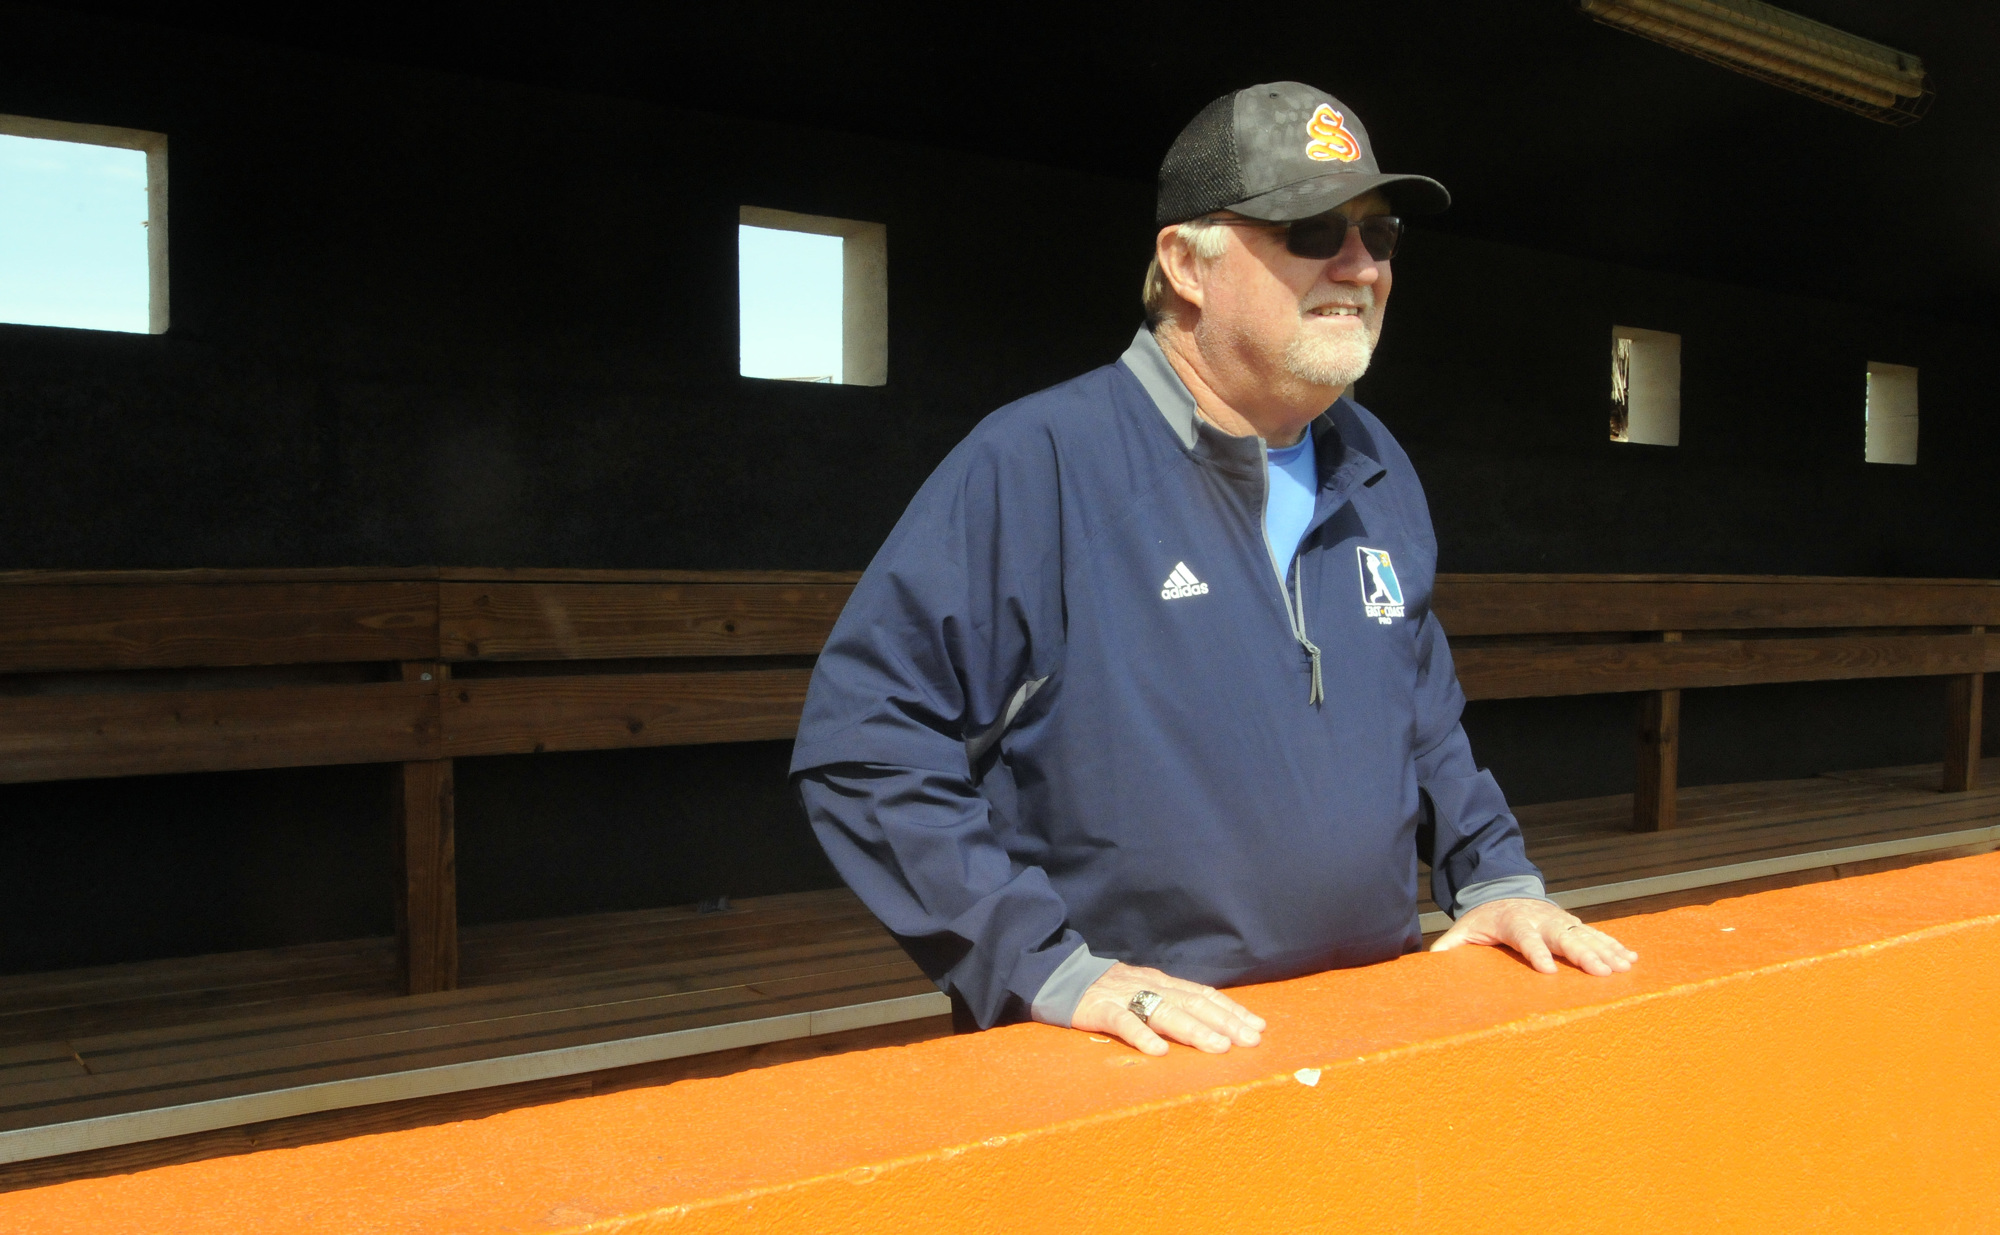 Sarasota High baseball coach Clyde Metcalf  said he knew he would never get rich taking the career path he did, but he never cared about the money. He cared about making a difference. File photo.